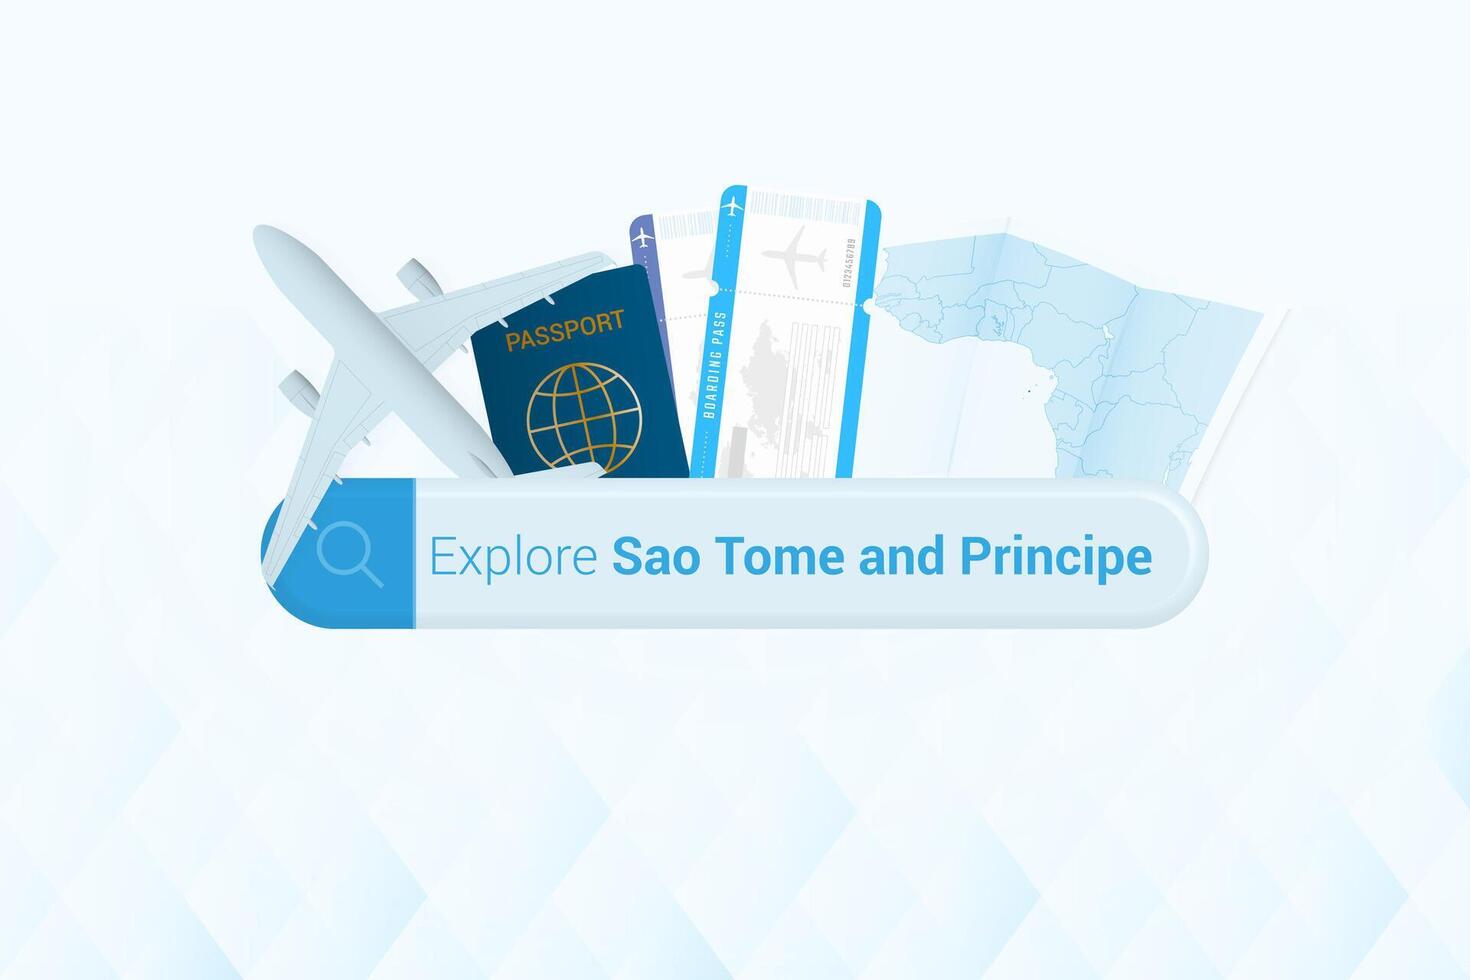 Searching tickets to Sao Tome and Principe or travel destination in Sao Tome and Principe. Searching bar with airplane, passport, boarding pass, tickets and map. vector